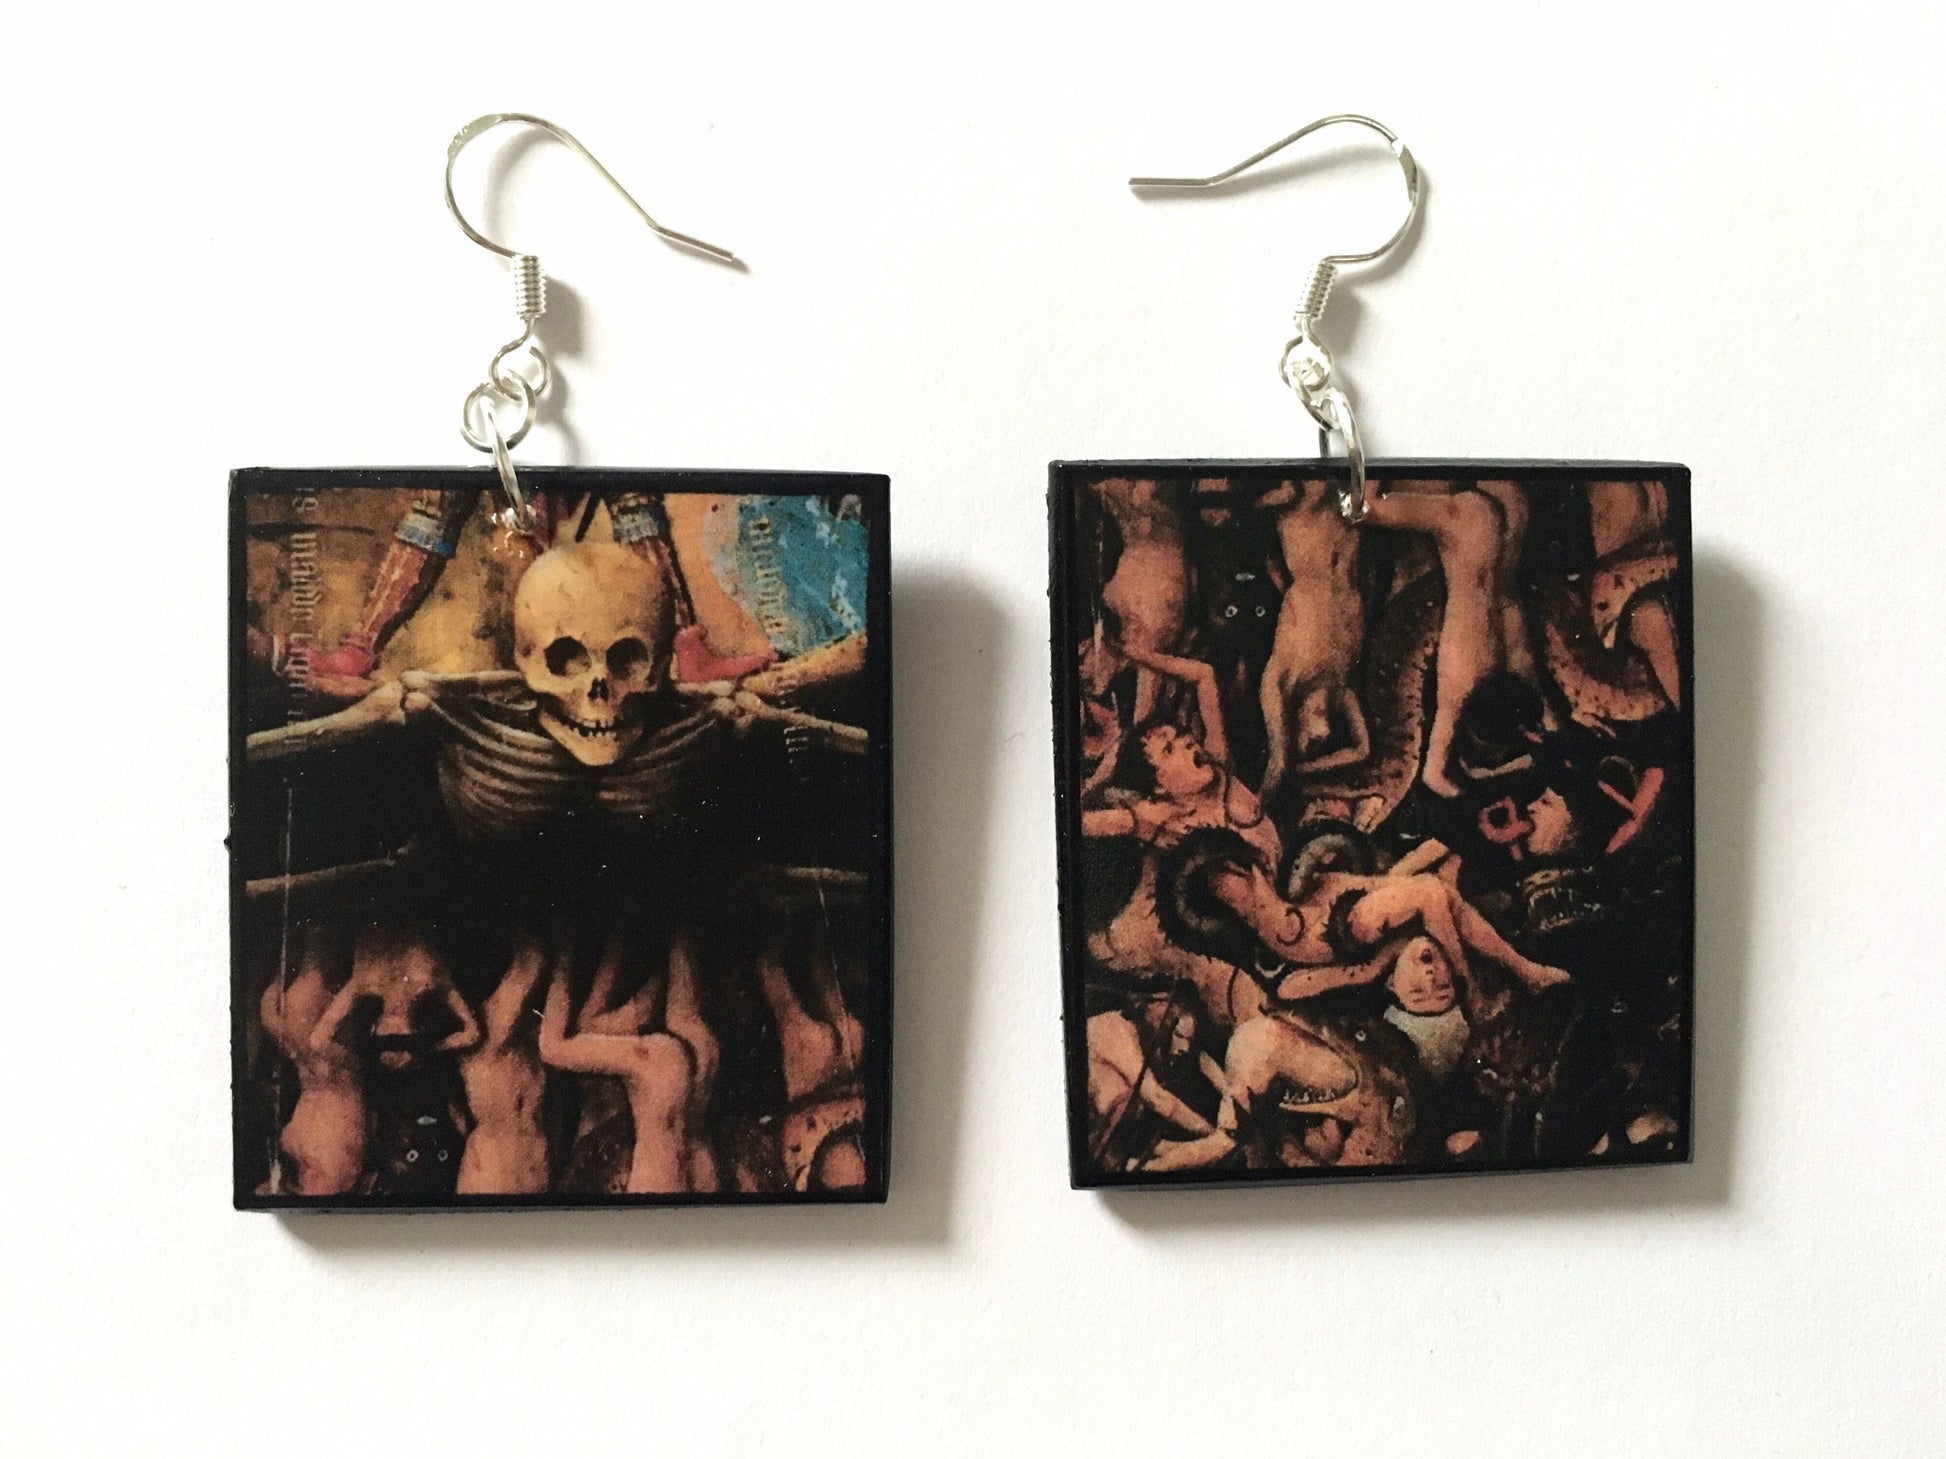 obljewellery statement, artsy gifts. The earrings represent a detail of the gothic painting” The Crucifixion; The Last Judgment” by Jan Van Eyck